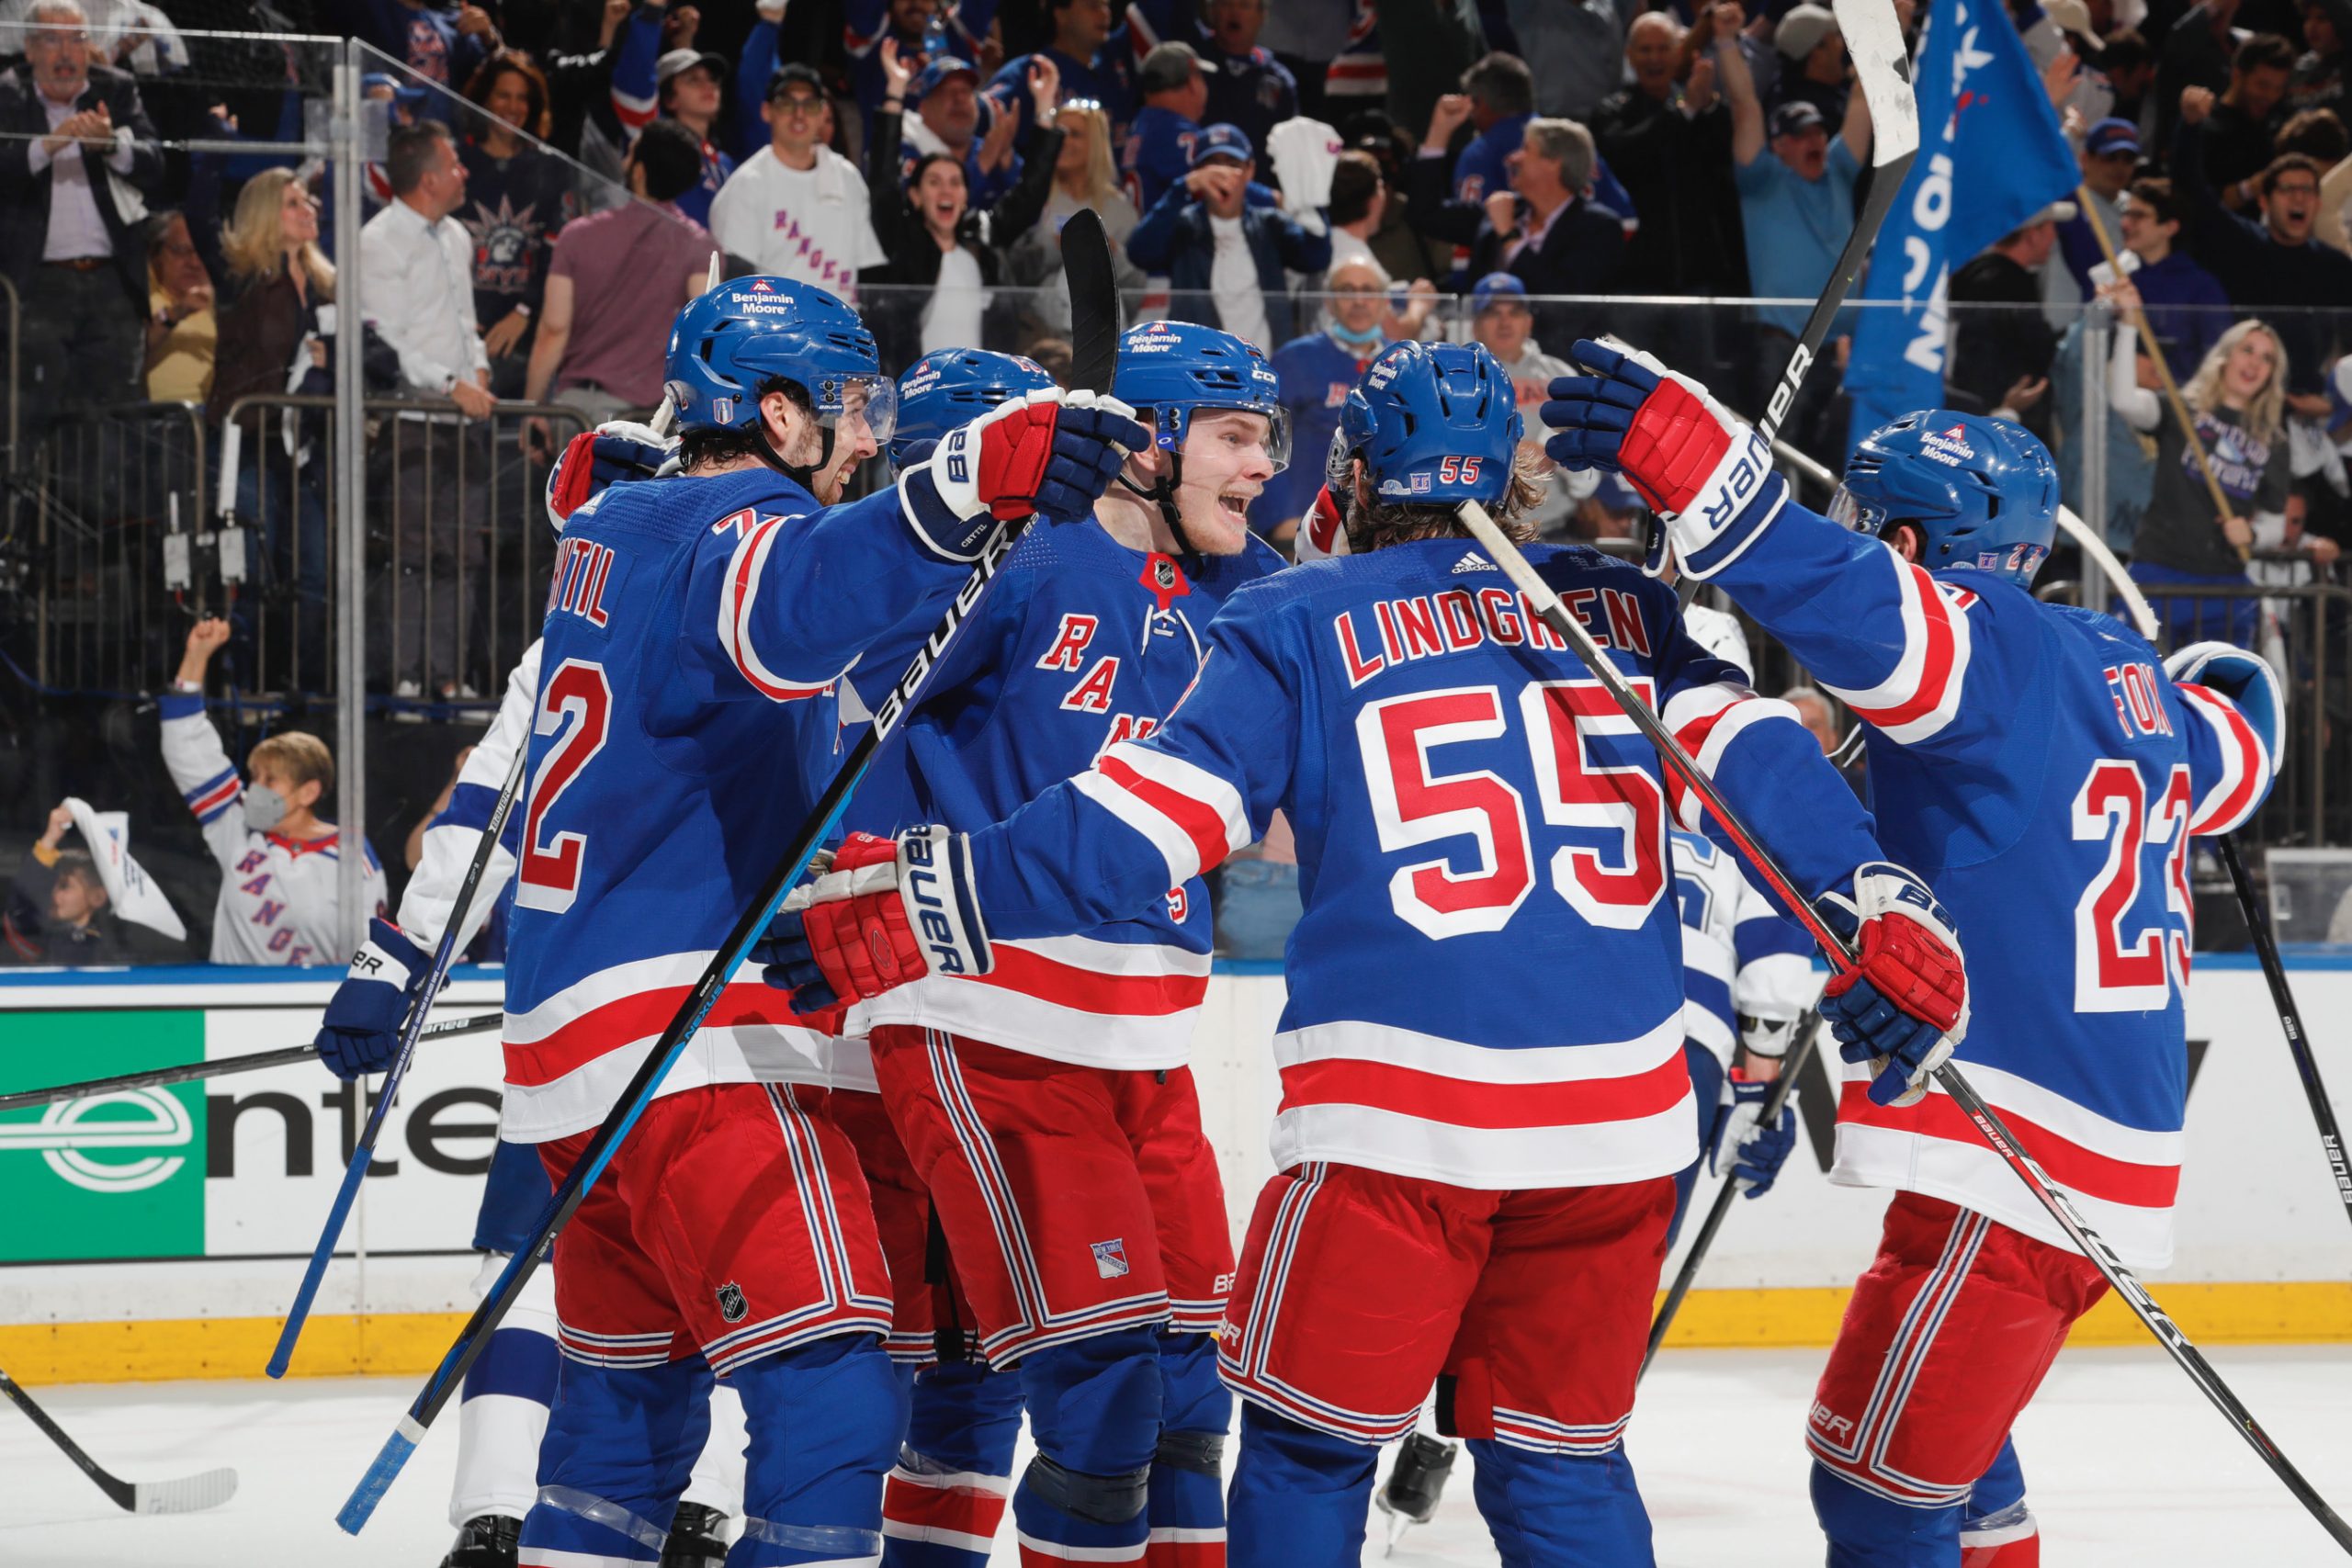 New York Rangers new lines all score in 6-2 romp over Panthers